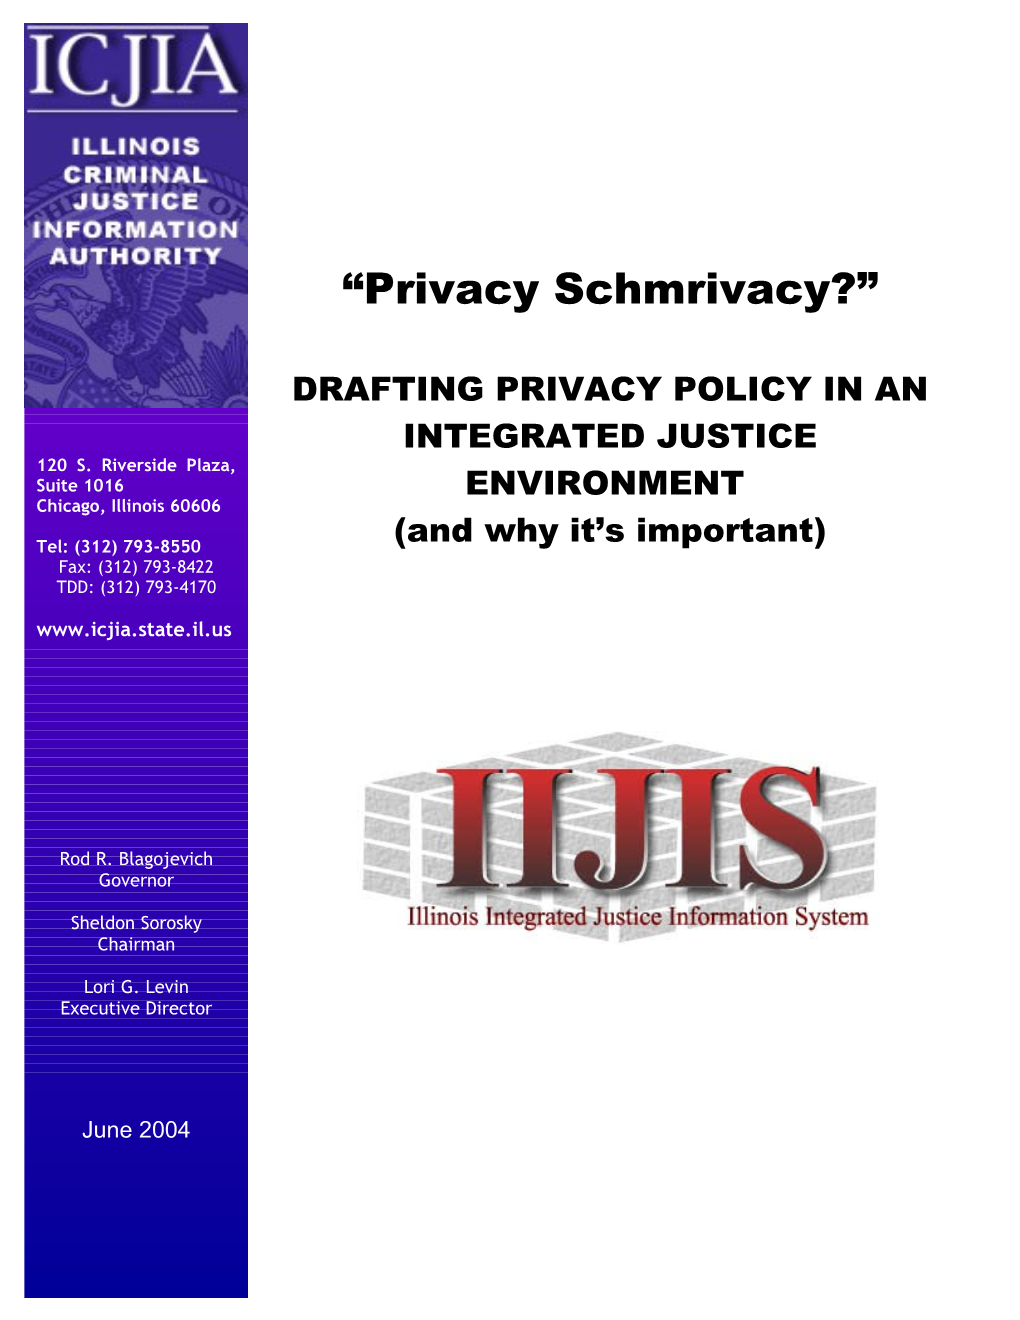 Privacy Schmirivacy? Drafting Privacy Policy in an Integrated Justice Environment (And